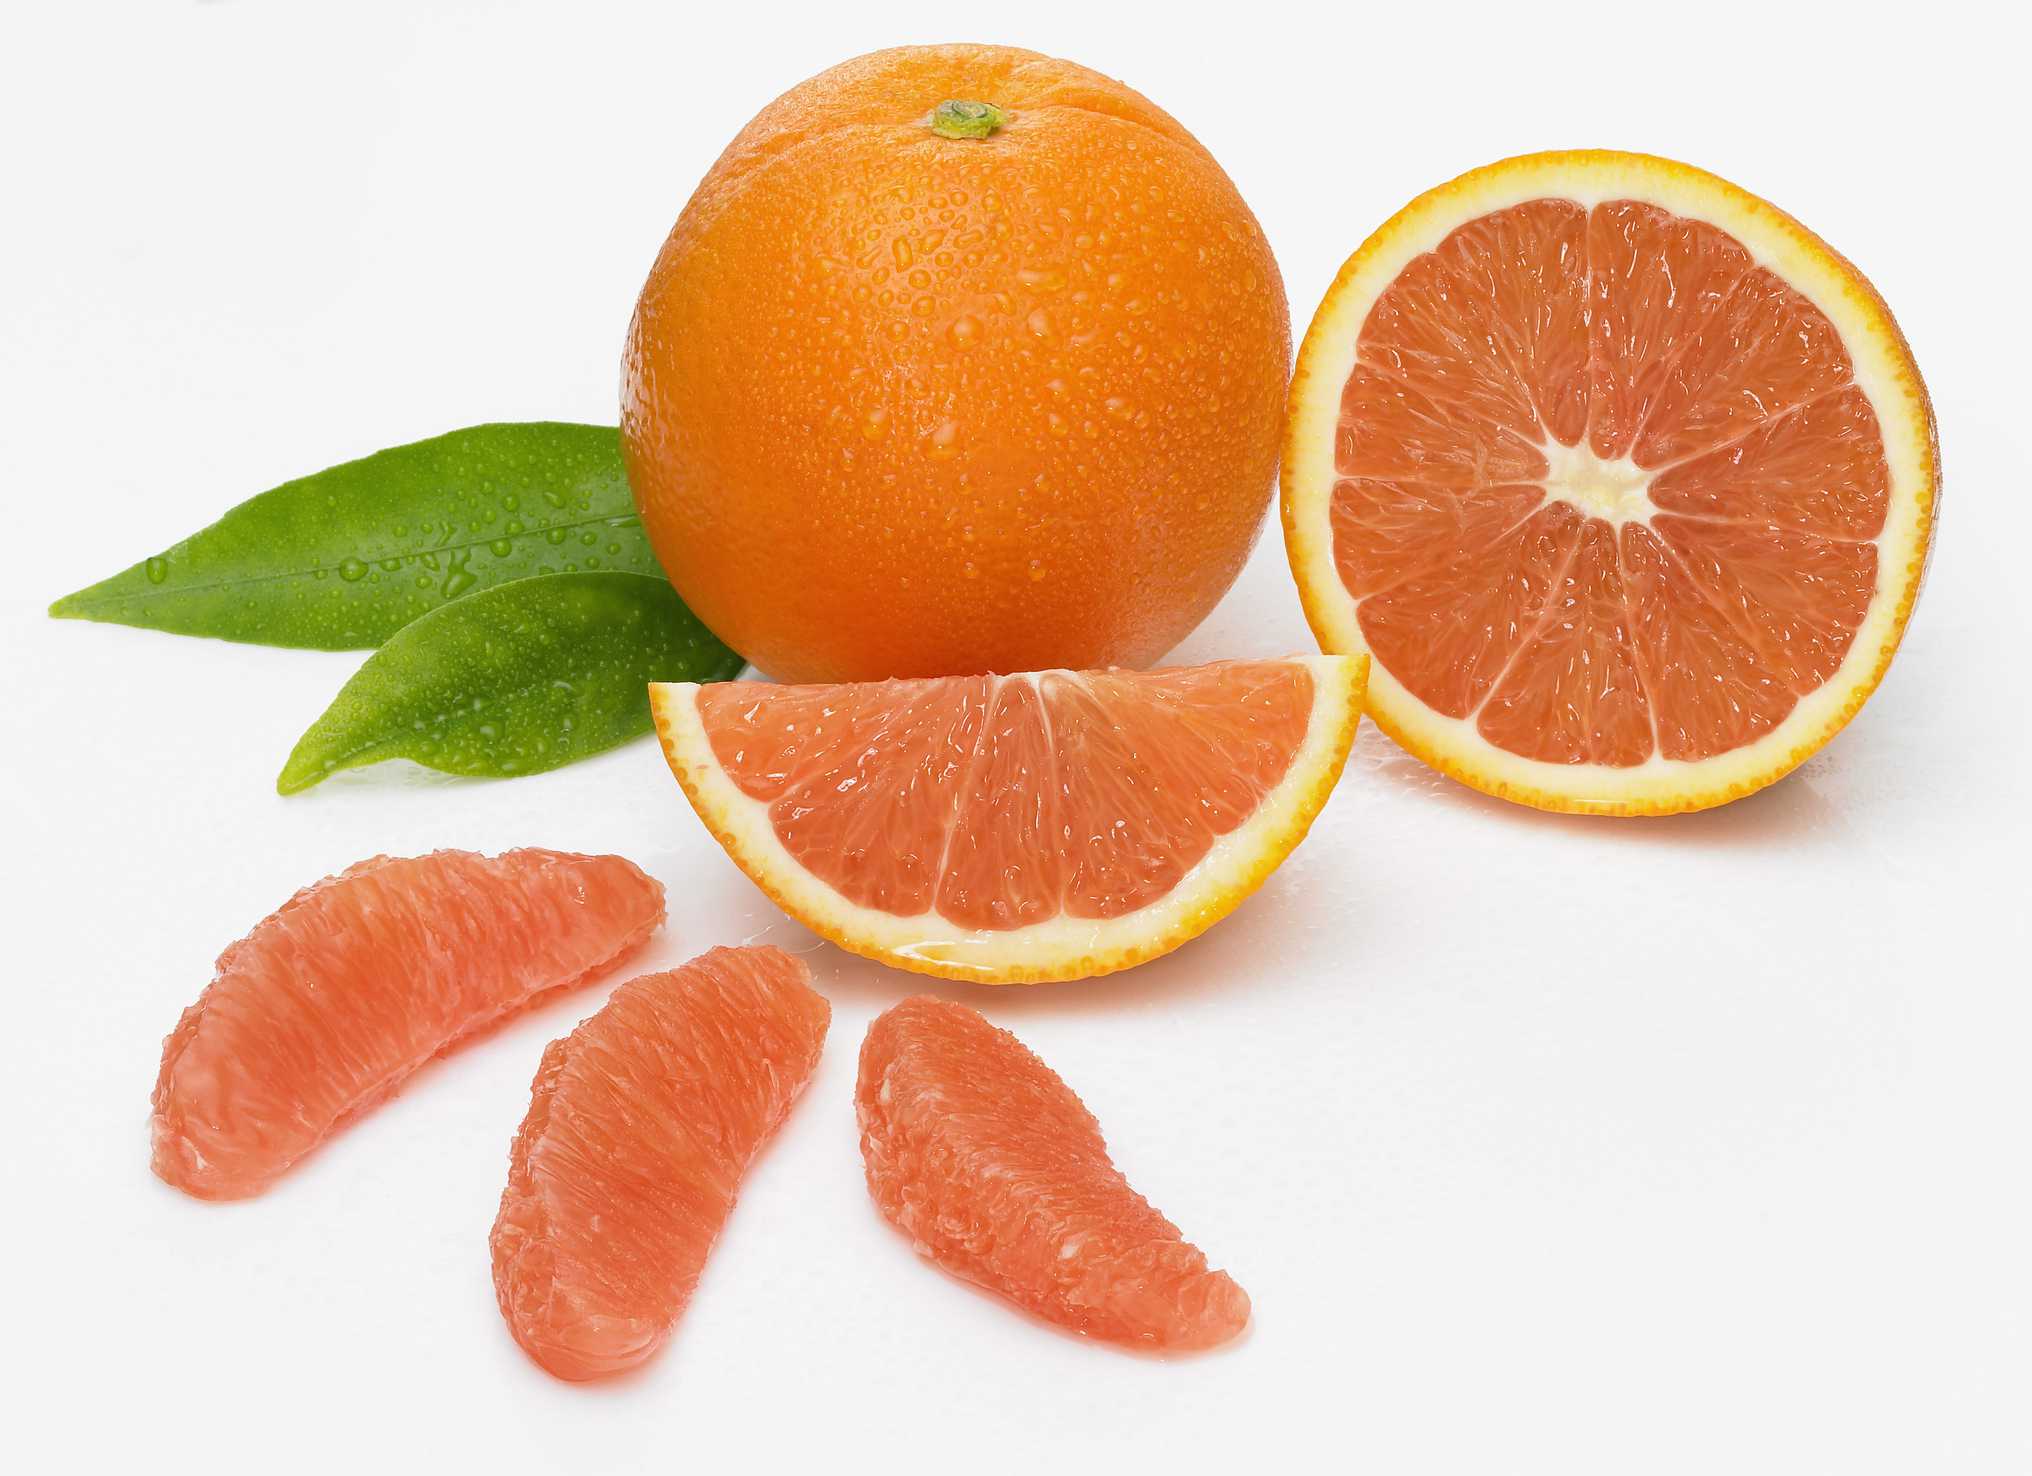 Guide to Orange and Tangerine Types